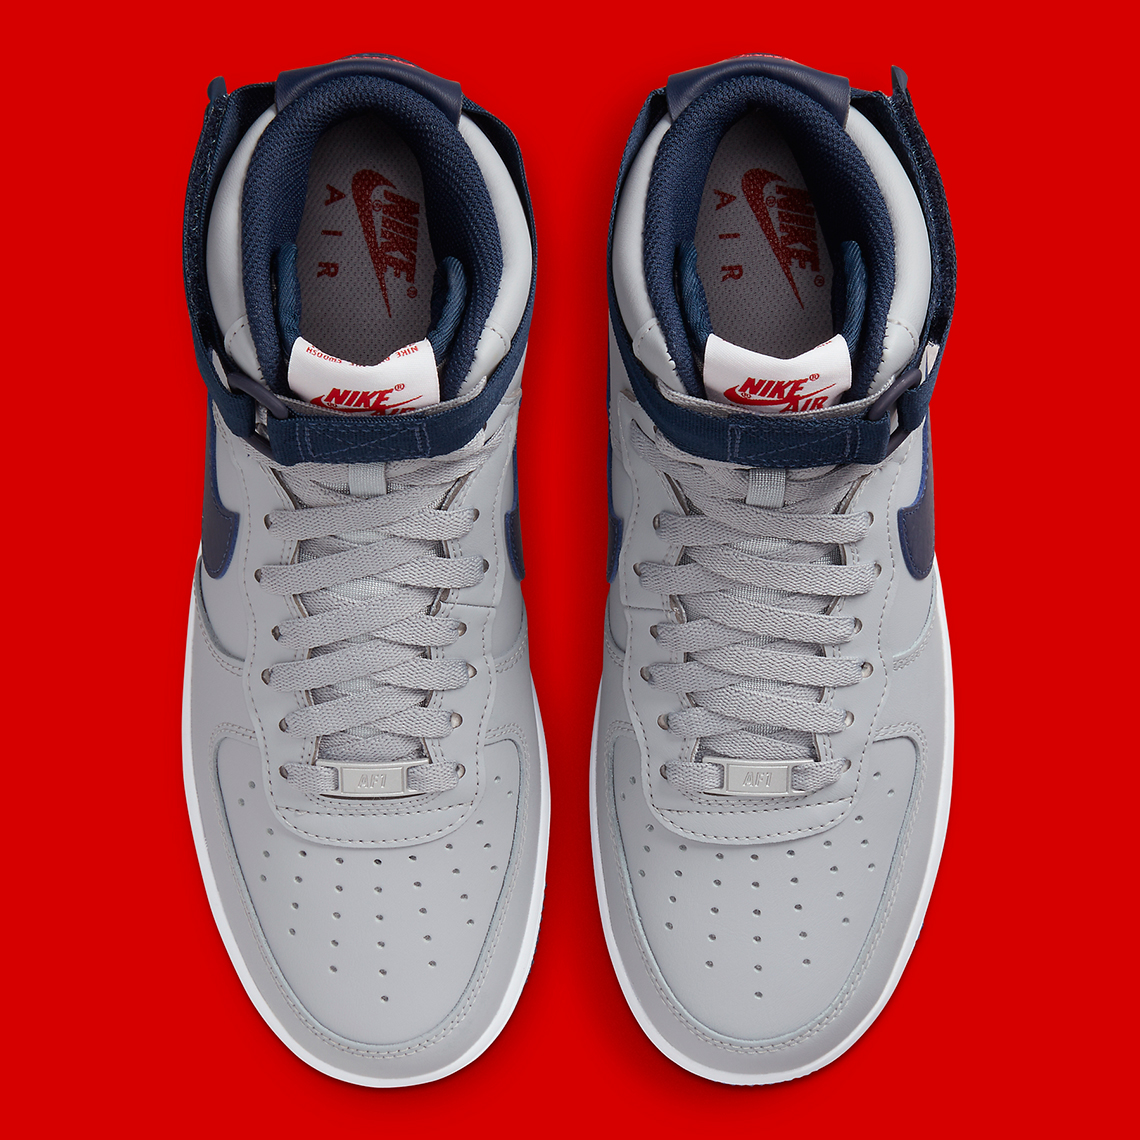 nike sb check for sale on ebay shoes High Grey Navy Red Dz7338 001 6